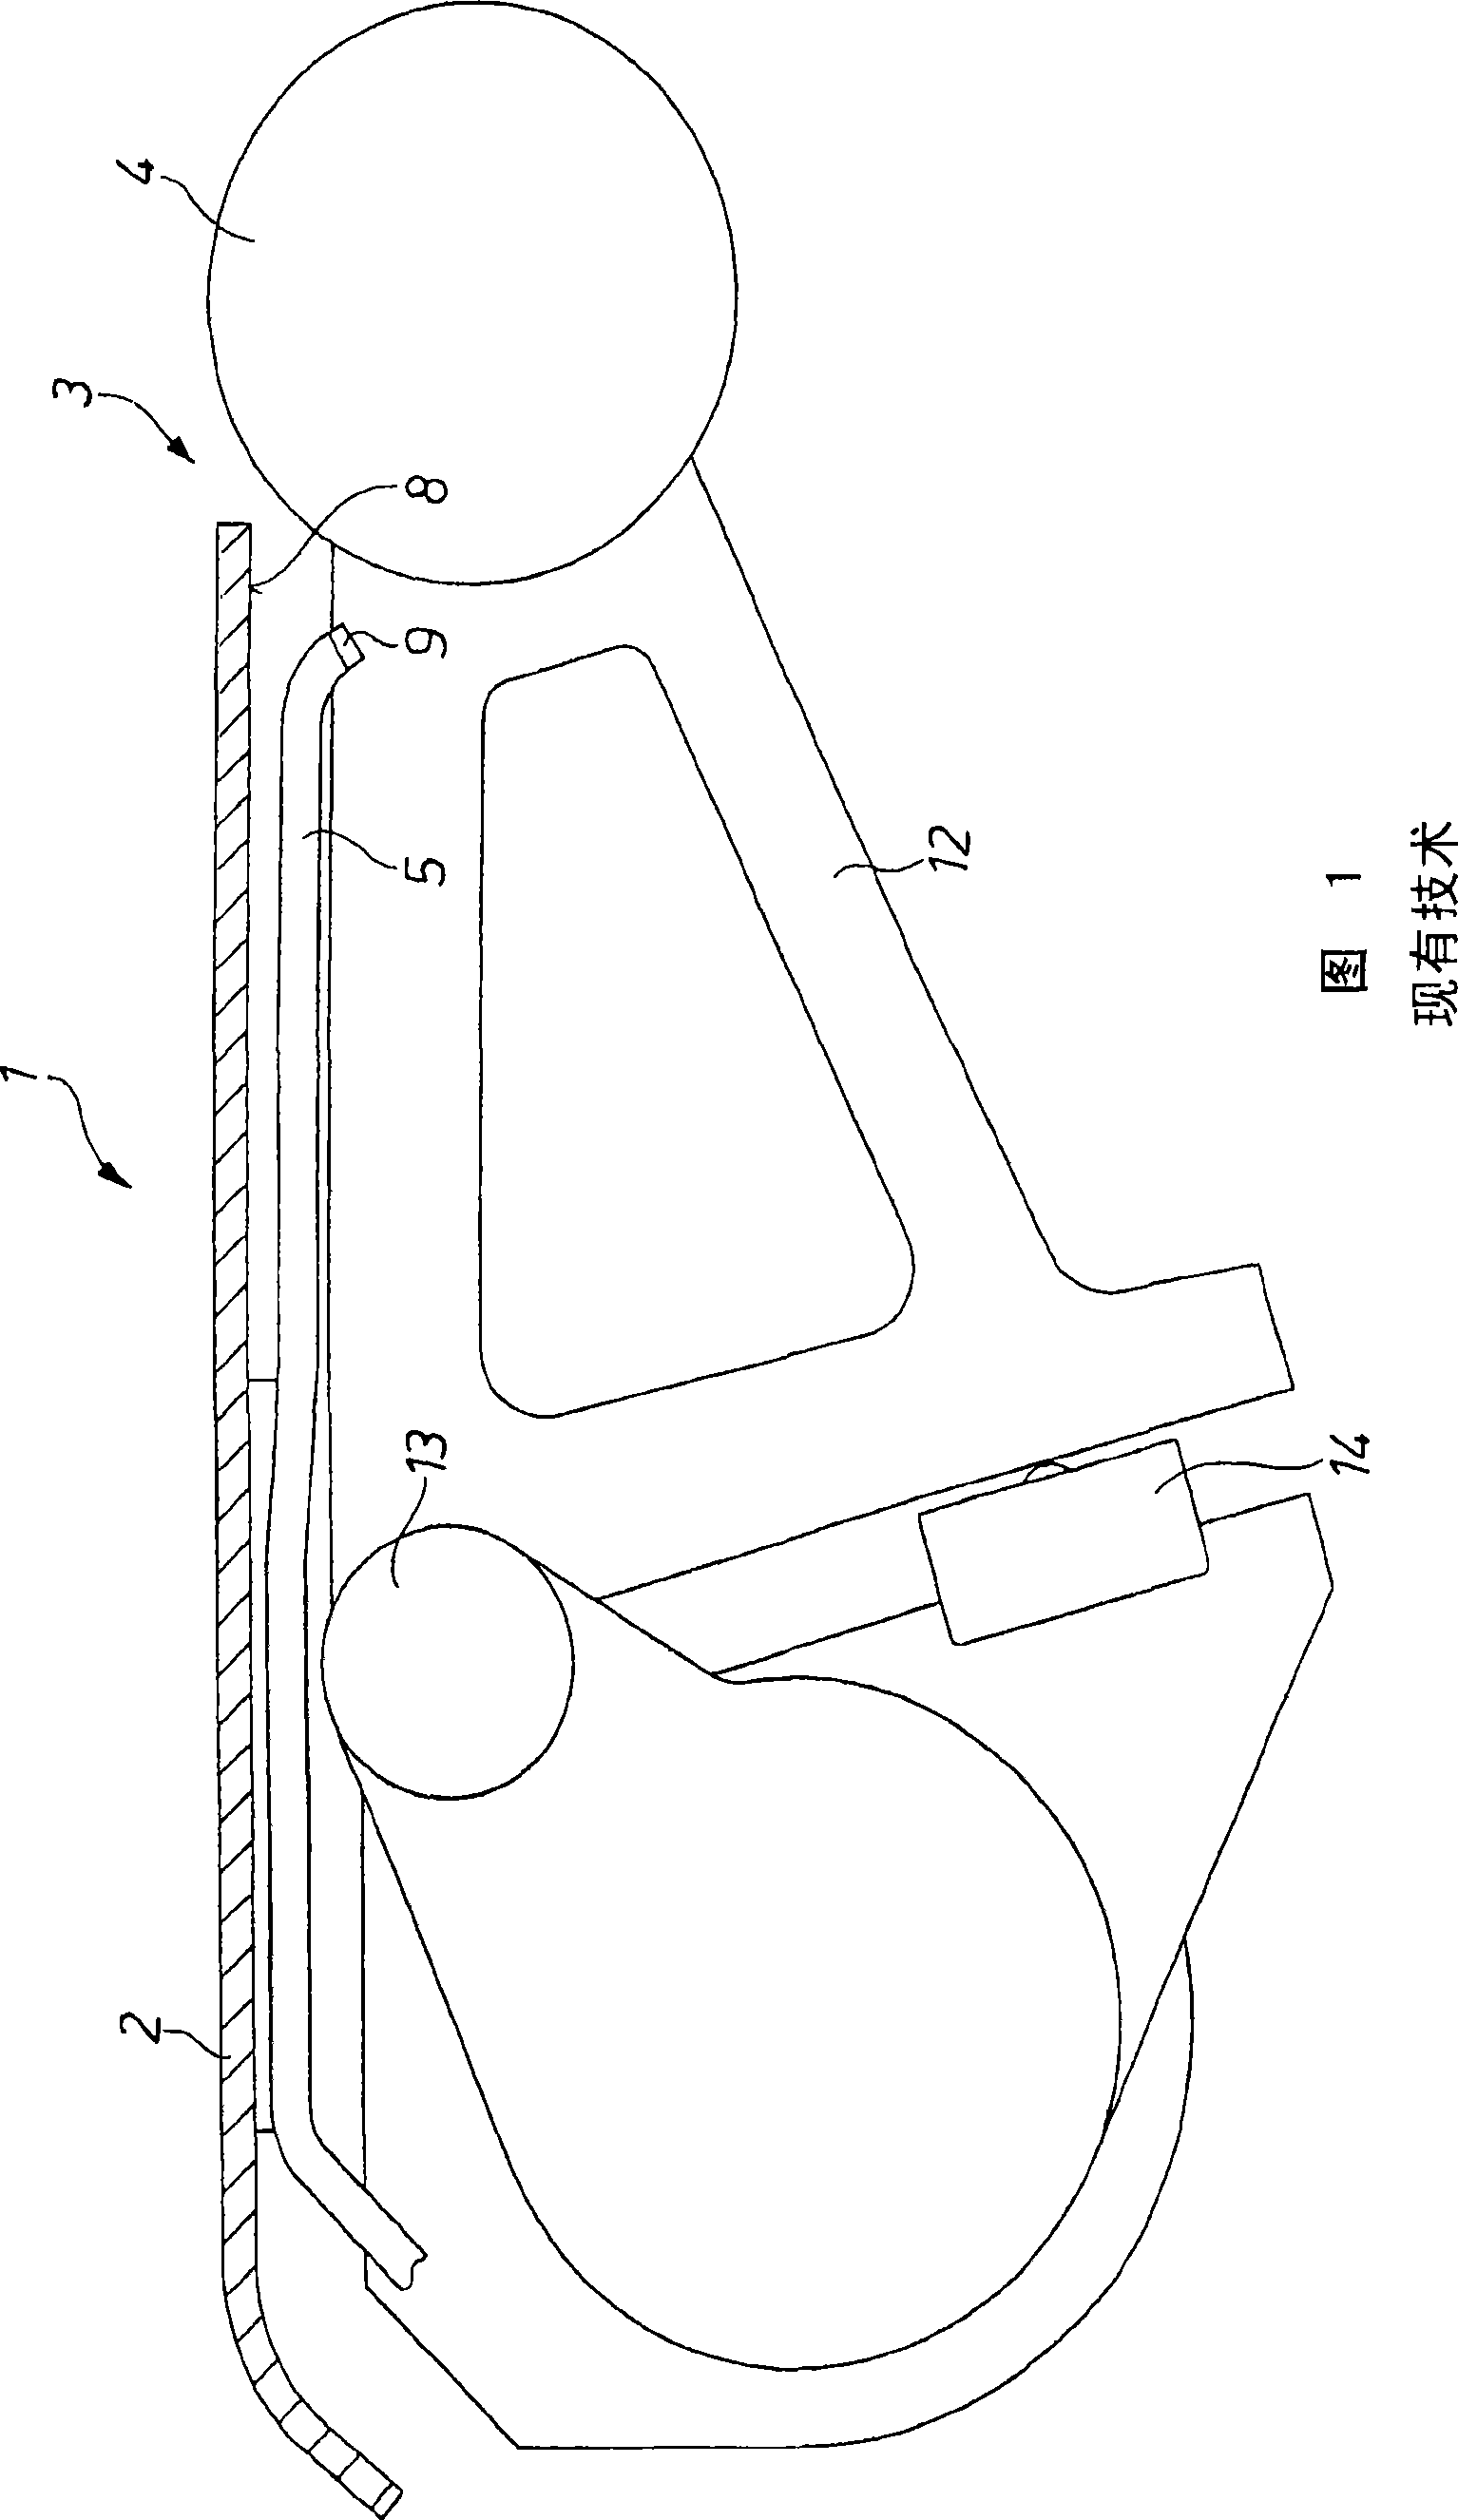 Device for measuring the tension in a metallic strip